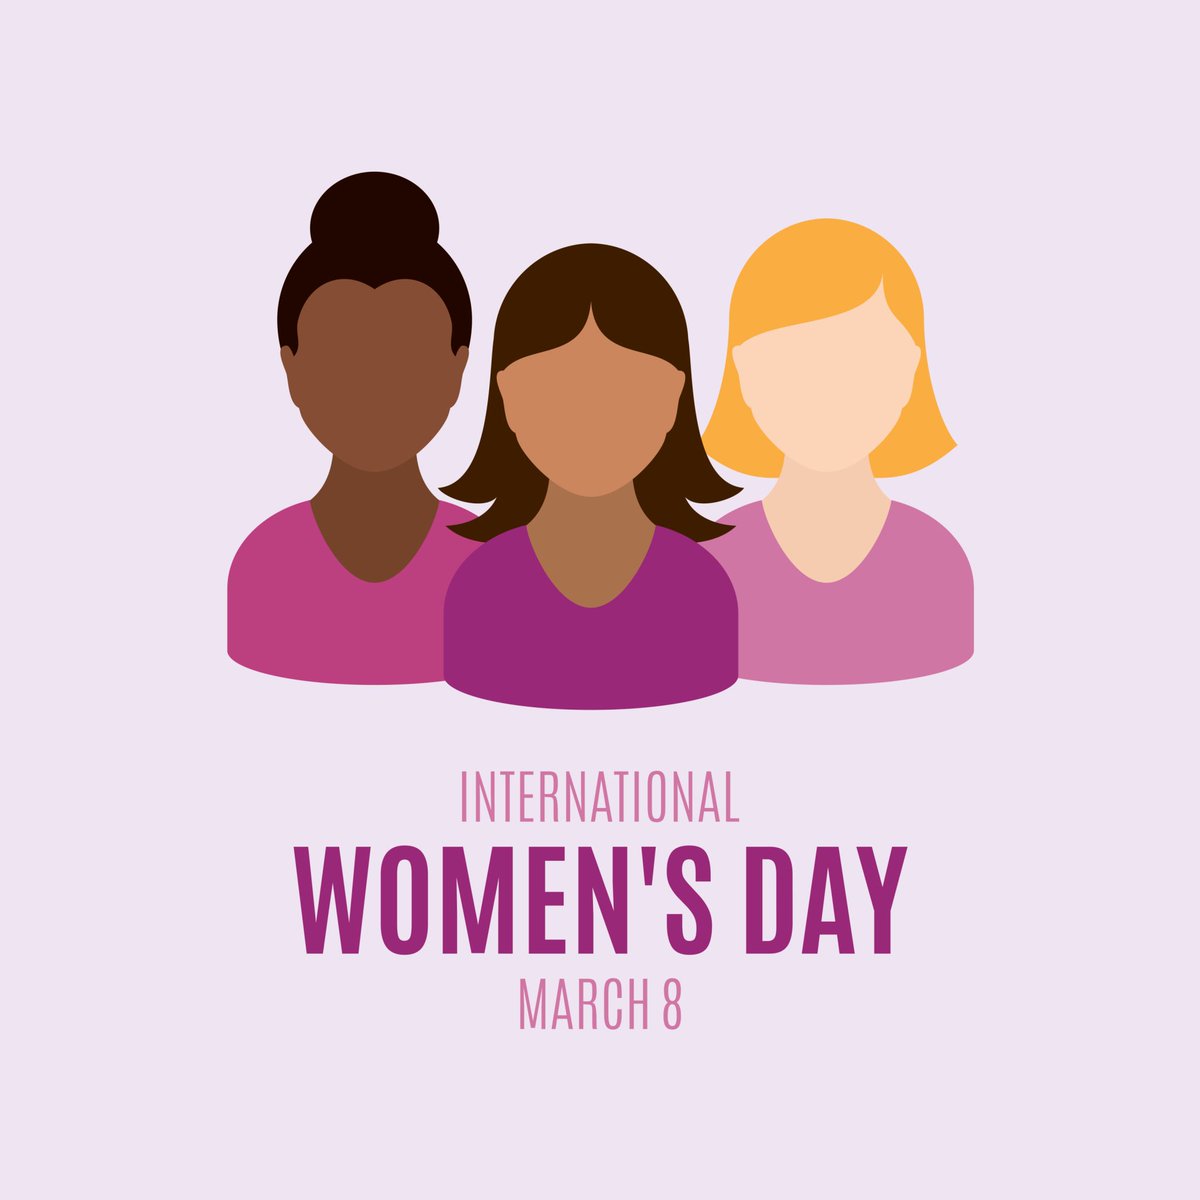 'My mother told me to be a lady. And for her, that meant be your own person, be independent' ~ Ruth Bader Ginsburg May you always embrace your uniqueness and celebrate the powerful woman within you. Happy International Women's Day! #internationalwomensday #ldnont #uniqueness